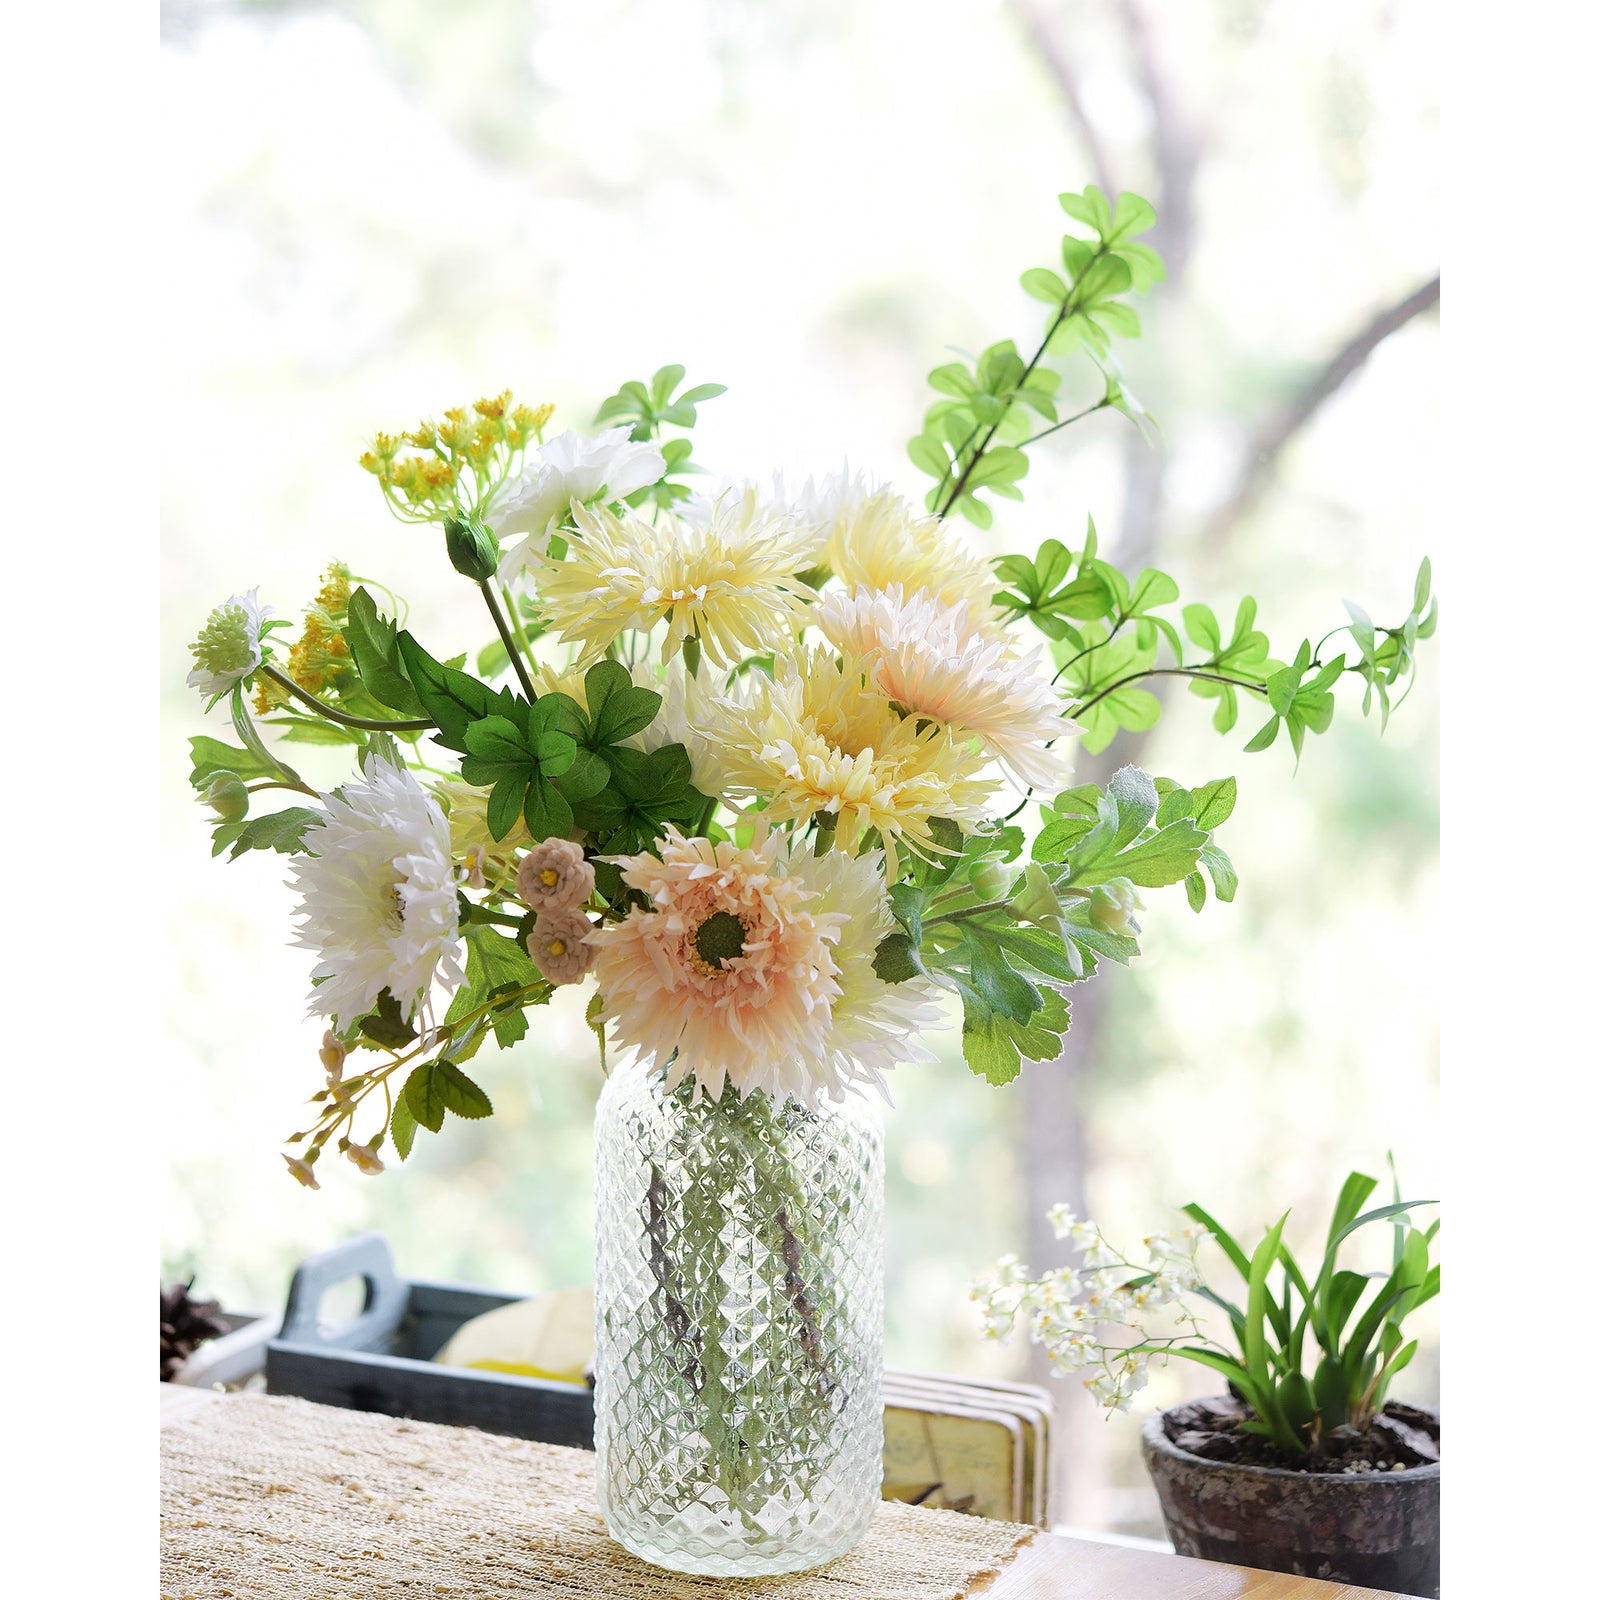 Dried Daisy Flowers Bouquet,Real Dry White Flower,Gerber Daisies